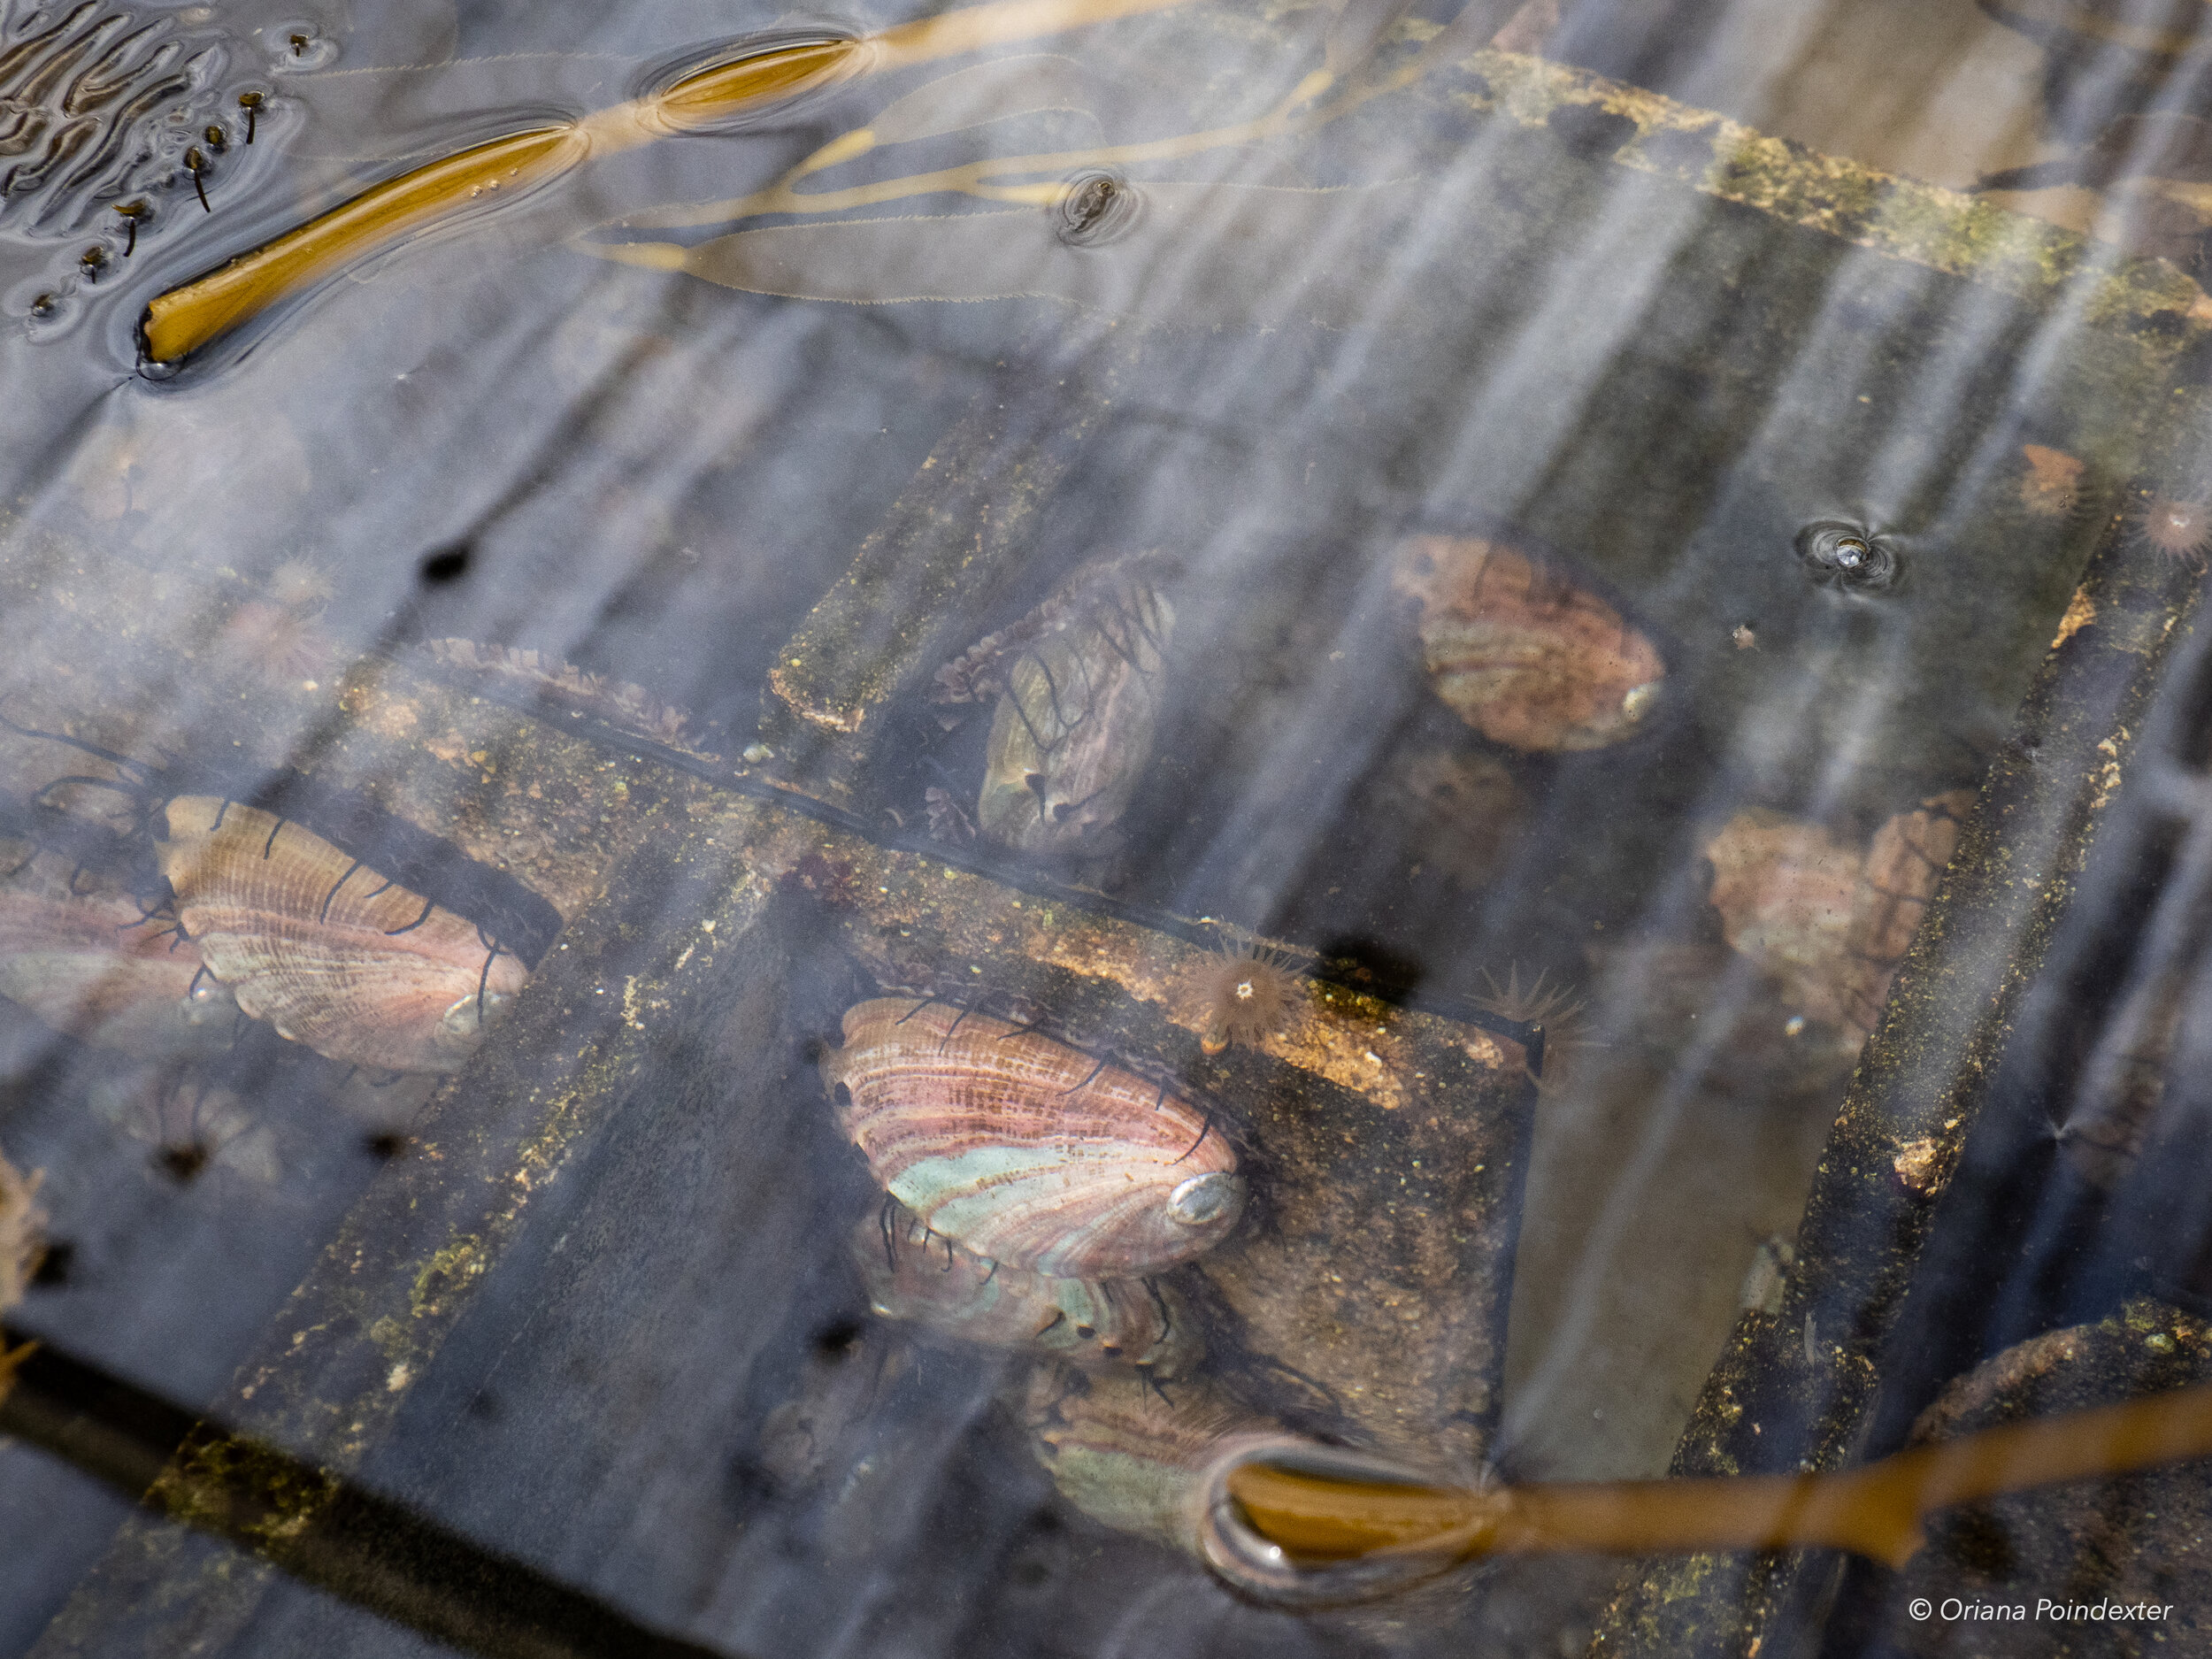 Red Abalone Aquaculture From Tank To Table At The Cultured Abalone Farm Oriana Poindexter